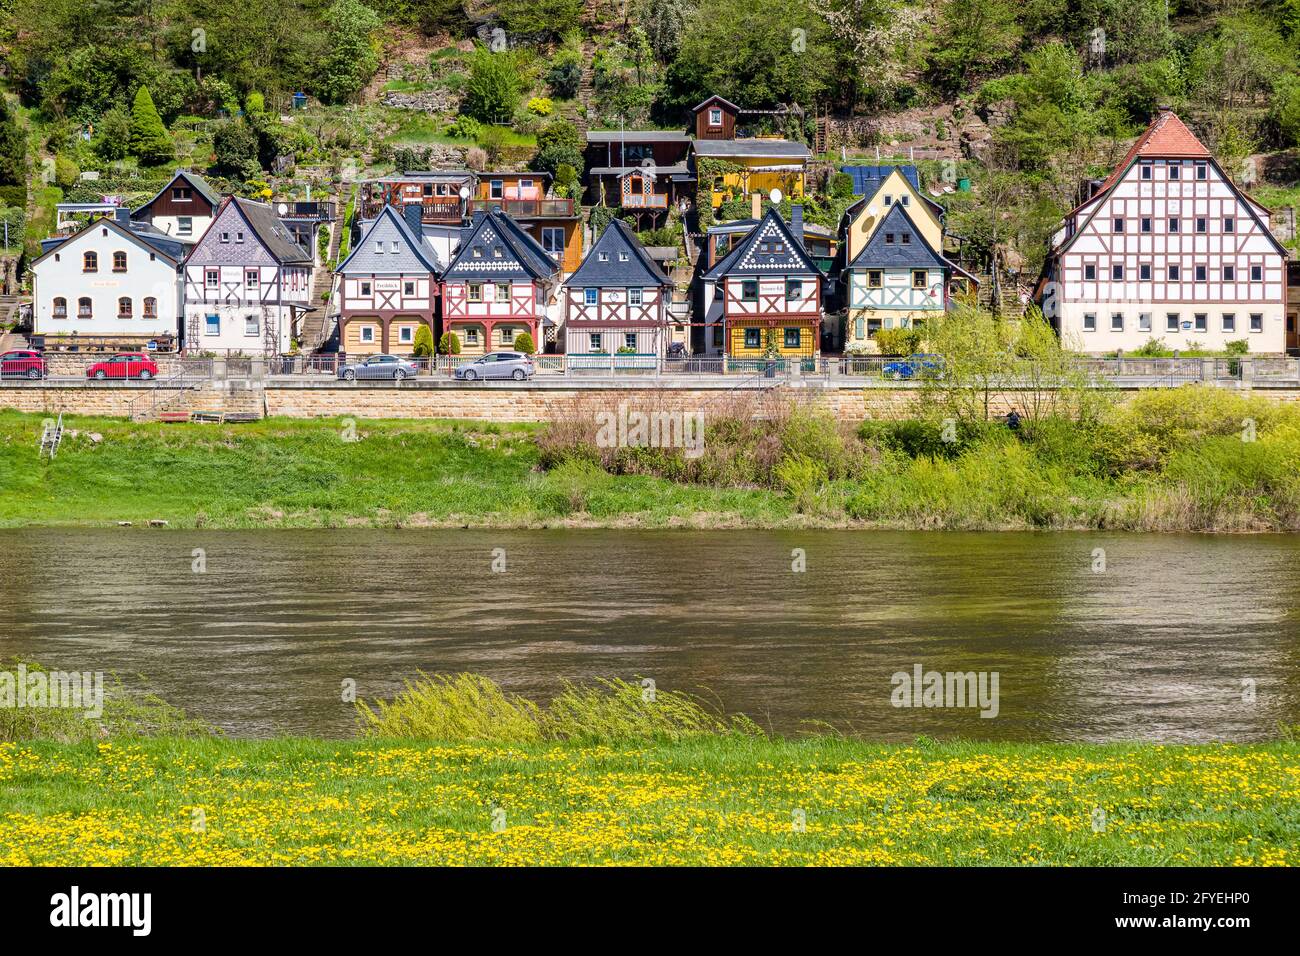 Houses of the seven brothers, Sieben-Brüder-Häuser, in the small village of Postelwitz, seen across the river Elbe. Stock Photo